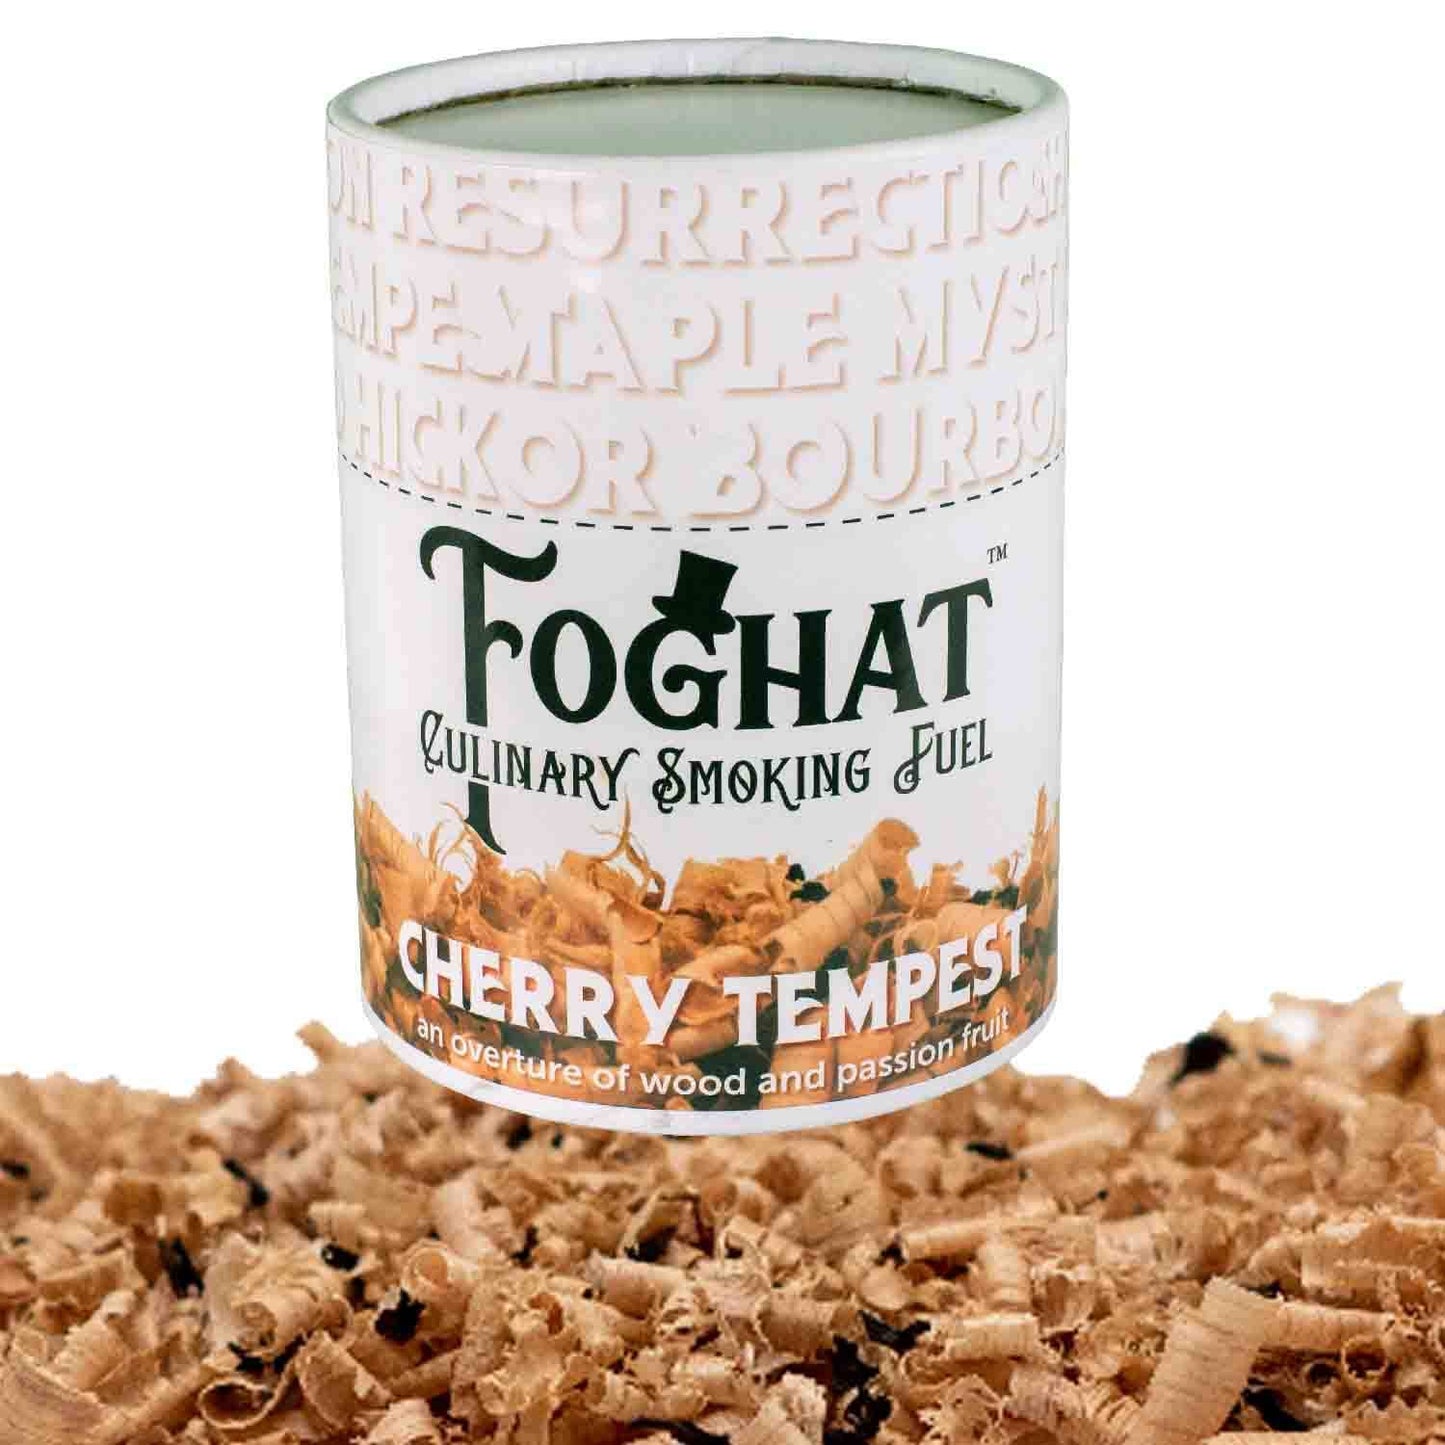 Cherry Tempest - Foghat Culinary Smoking Fuel - The Tool Store